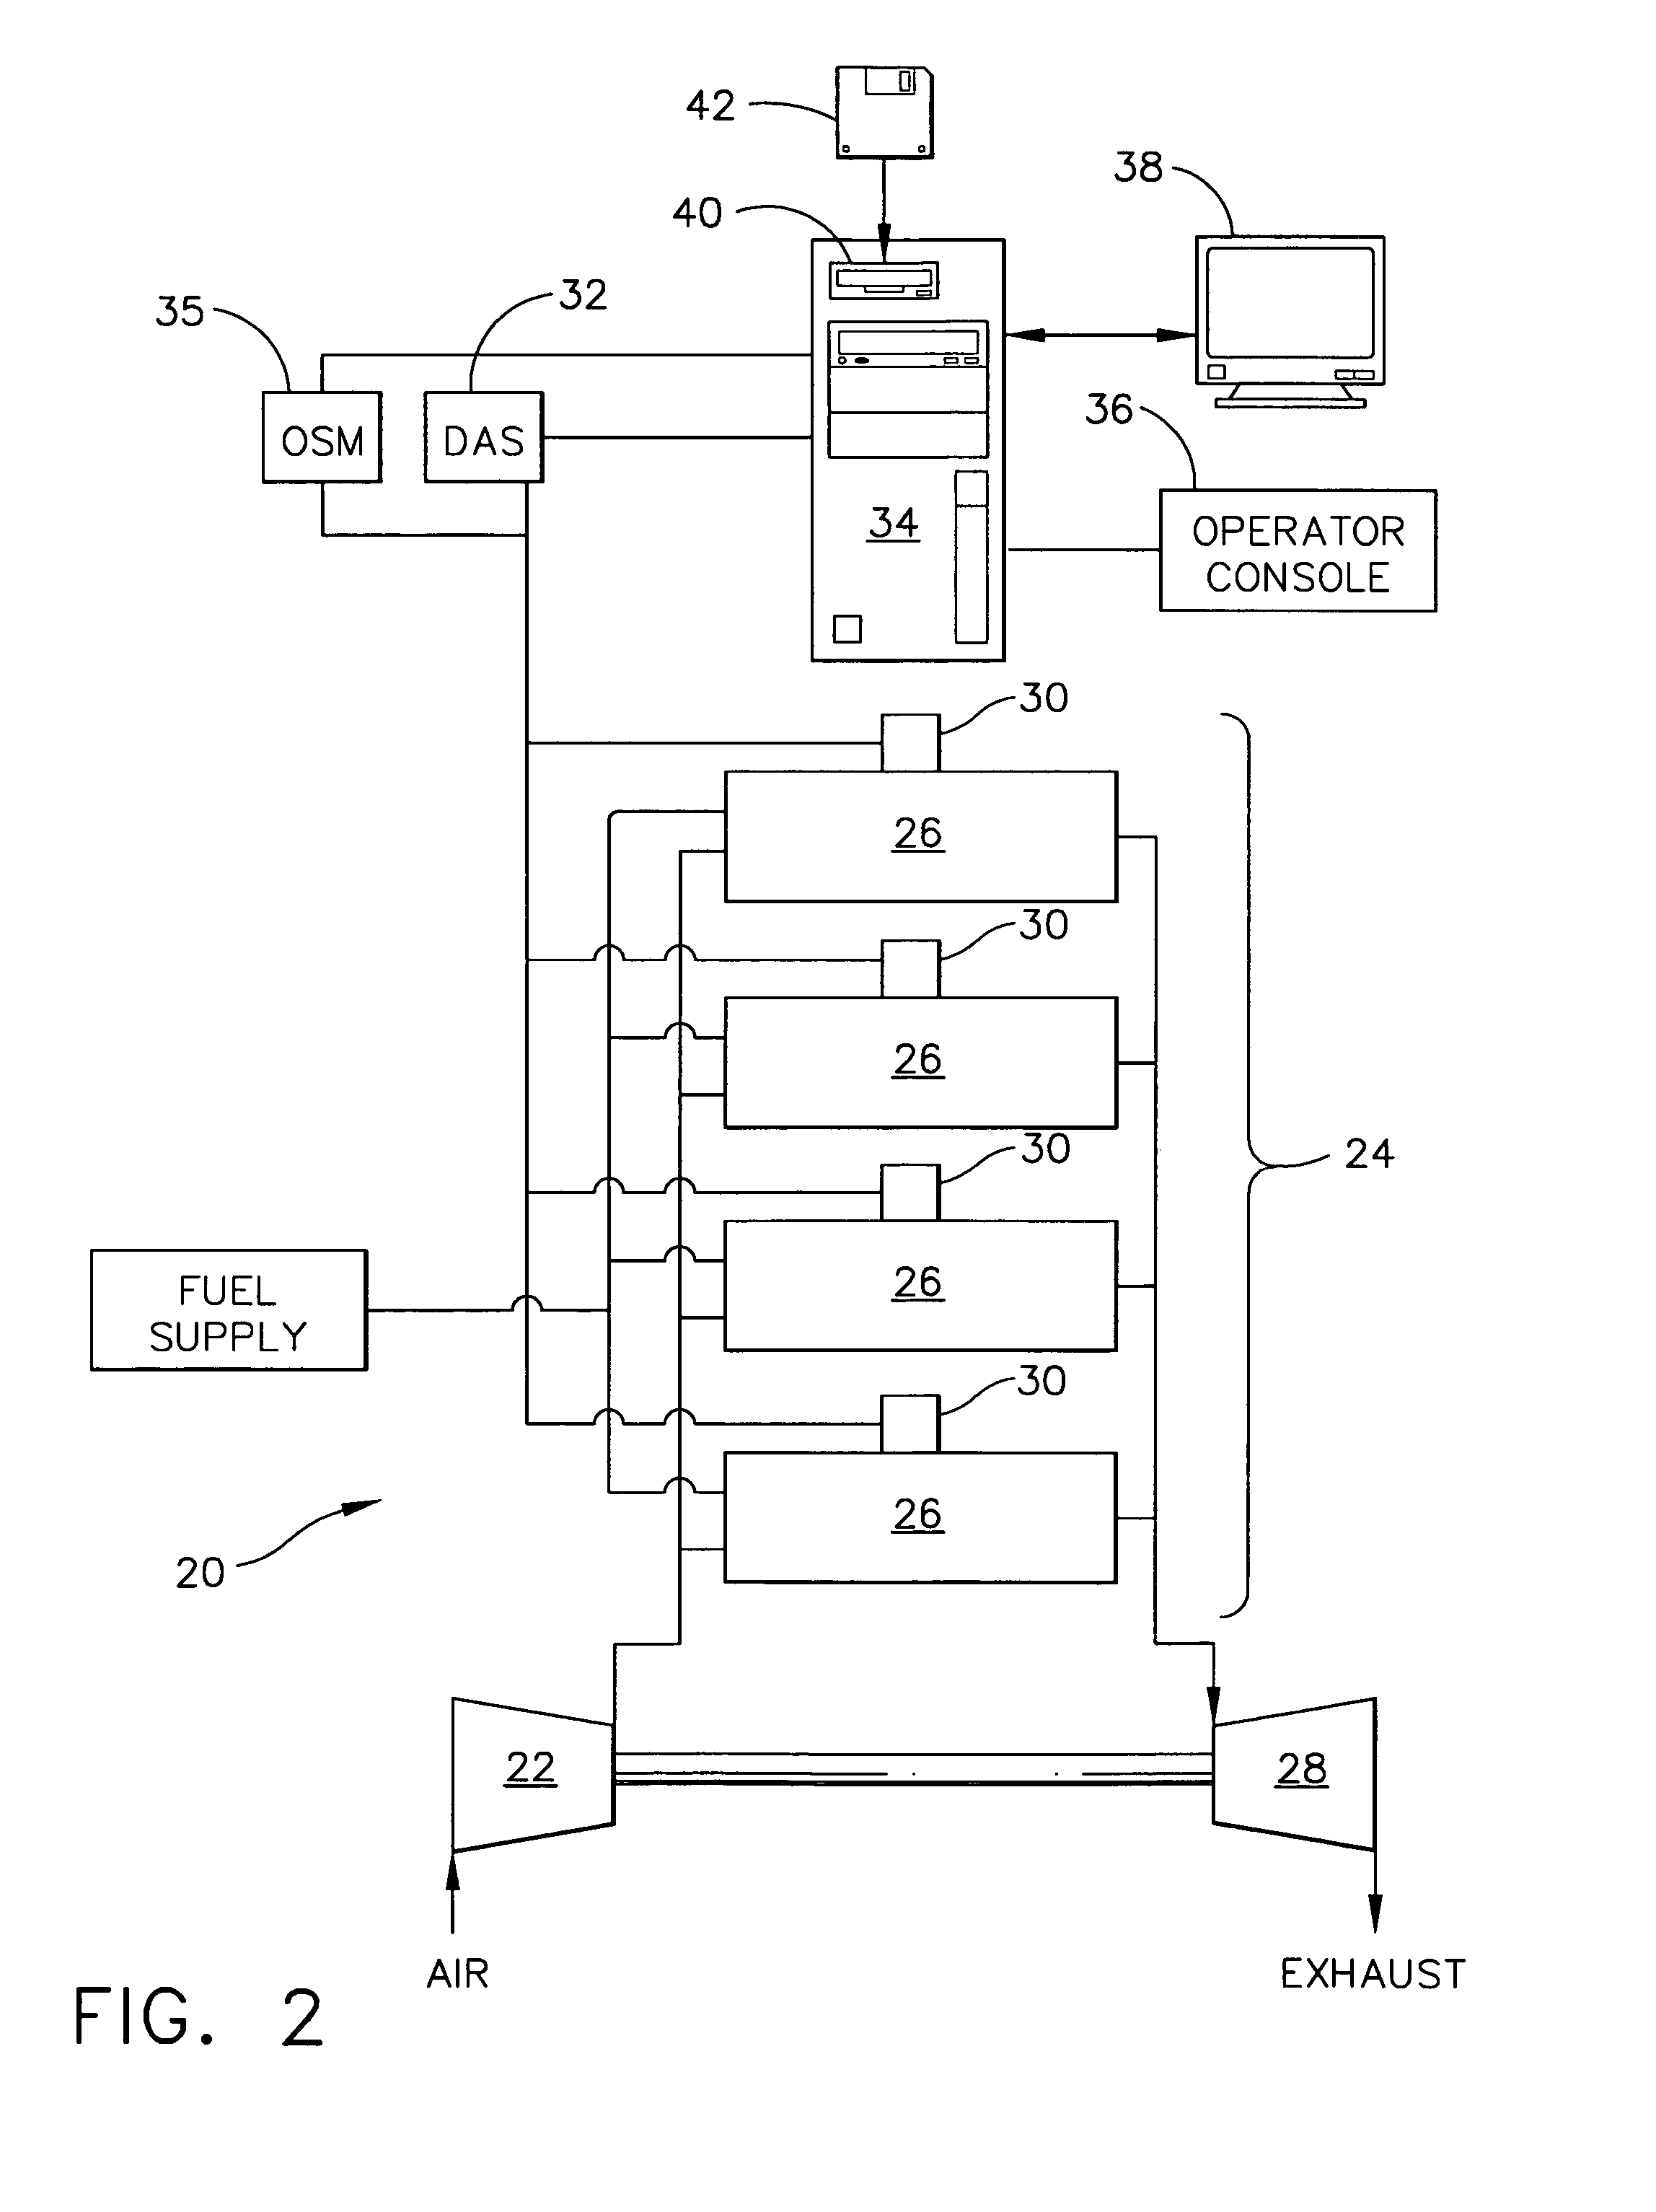 Methods and apparatus for monitoring gas turbine combustion dynamics